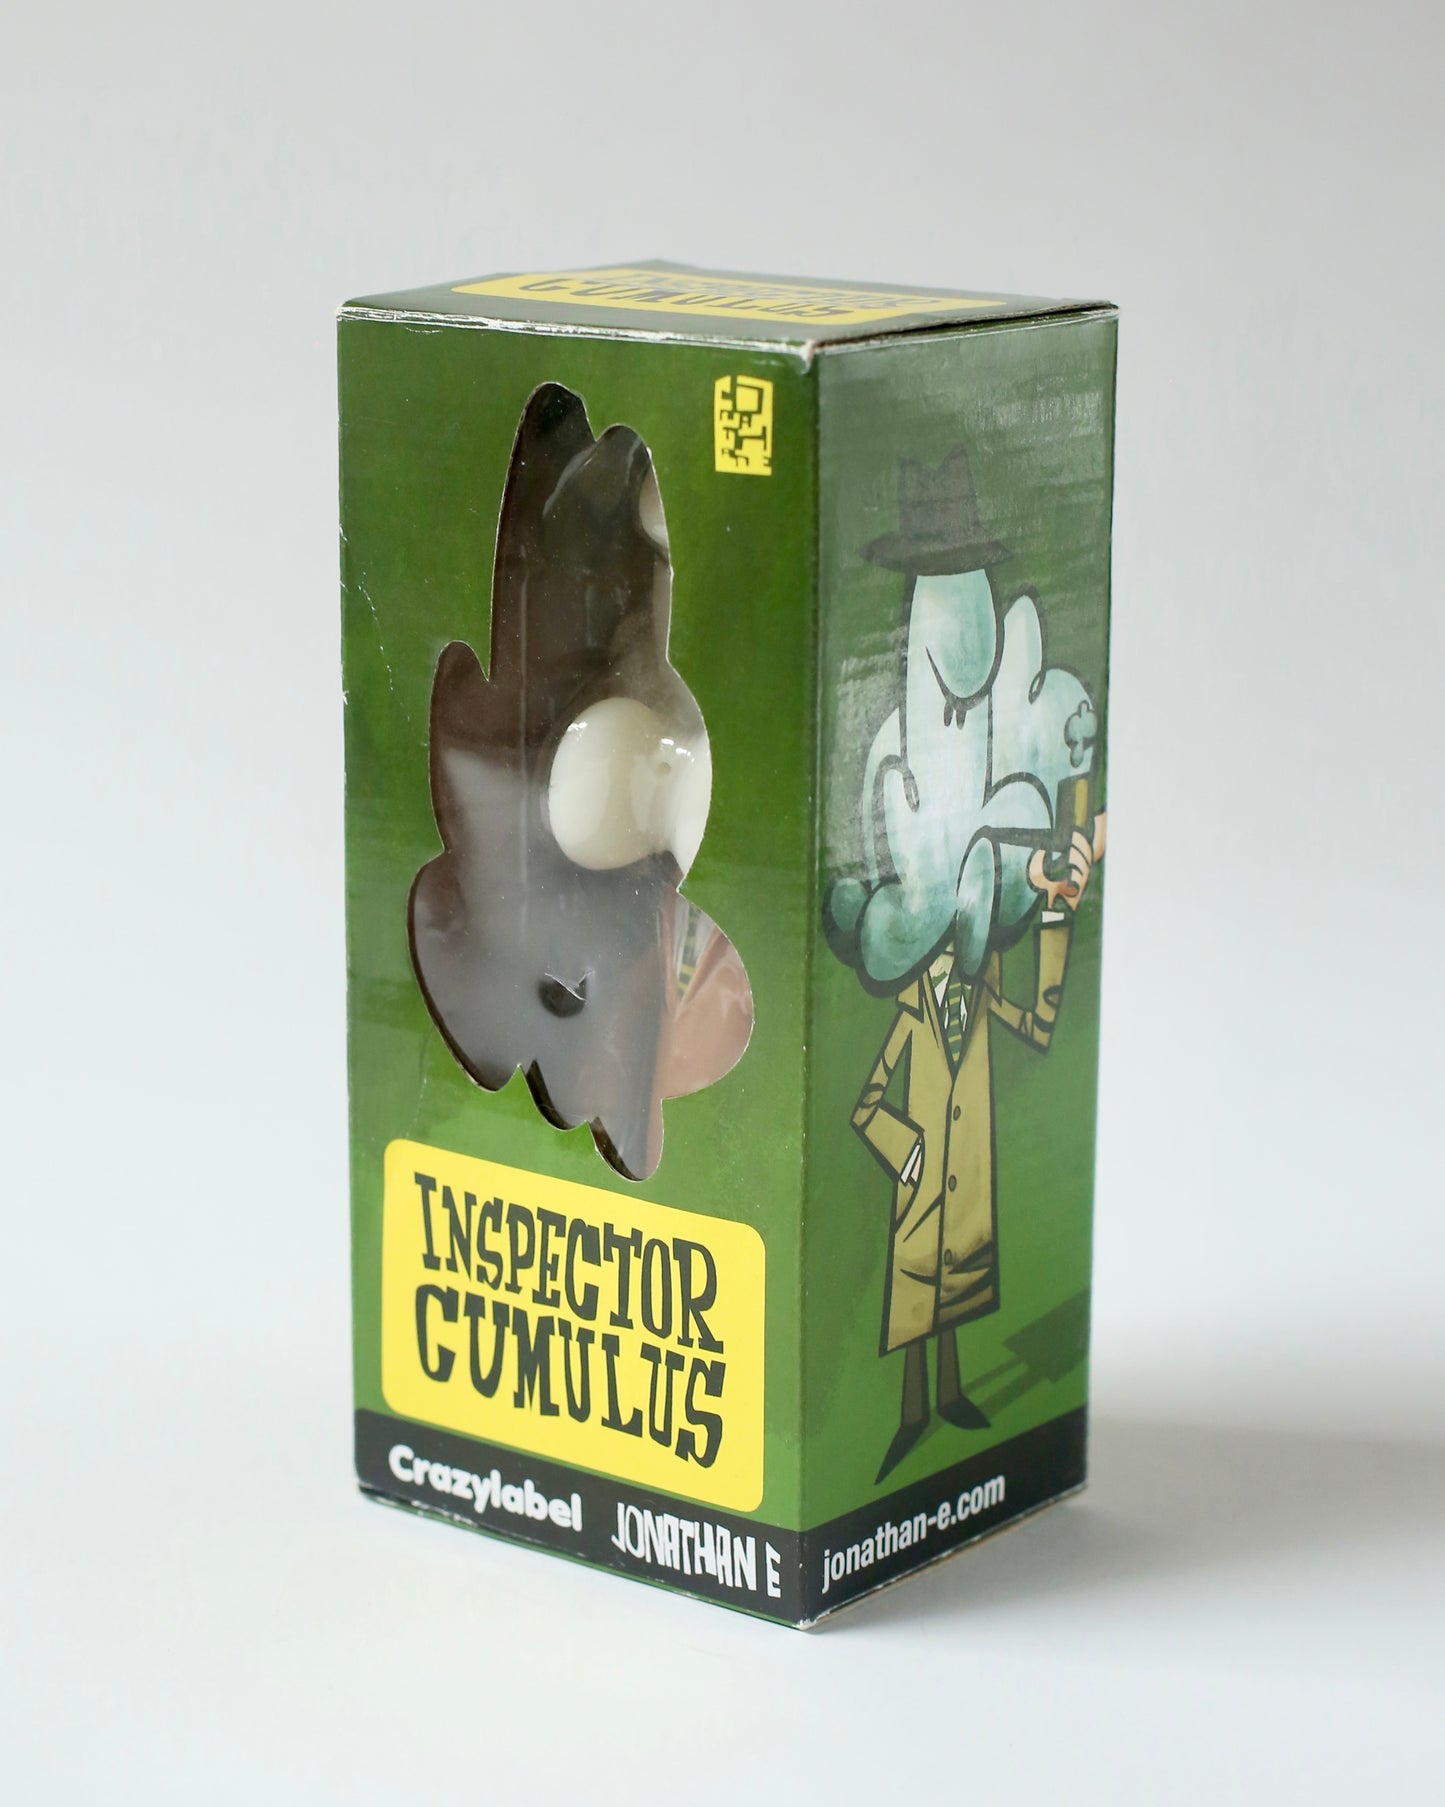 "Inspector Cumulus" by Jonathan Edwards